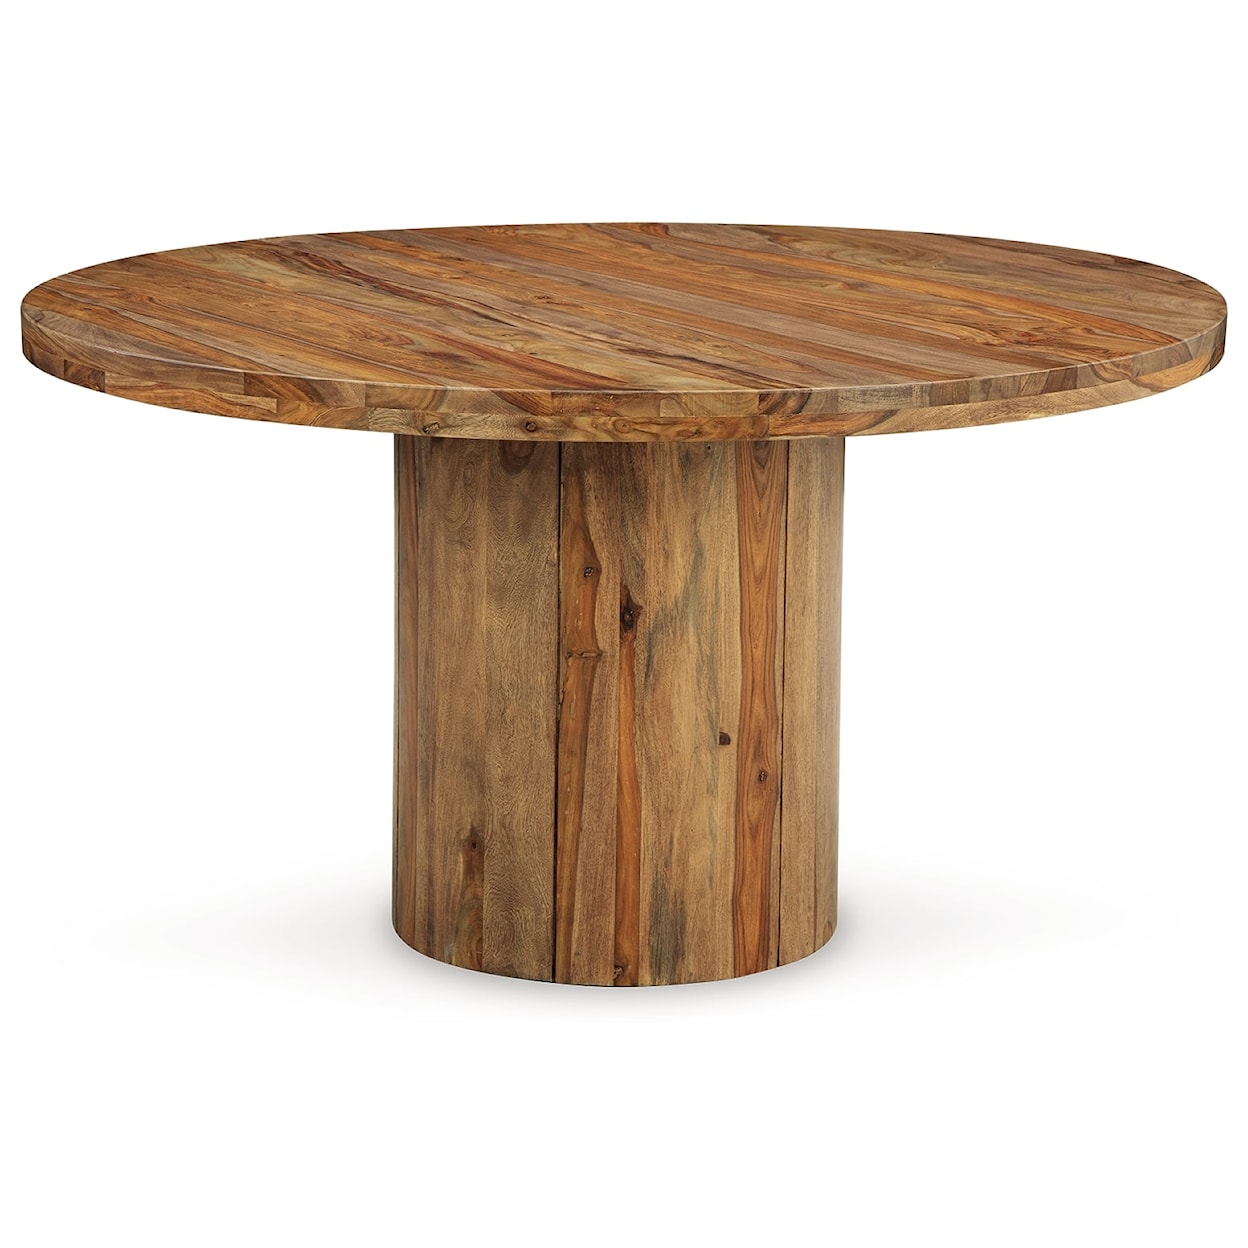 Signature Design by Ashley Dressonni Round Dining Room Table